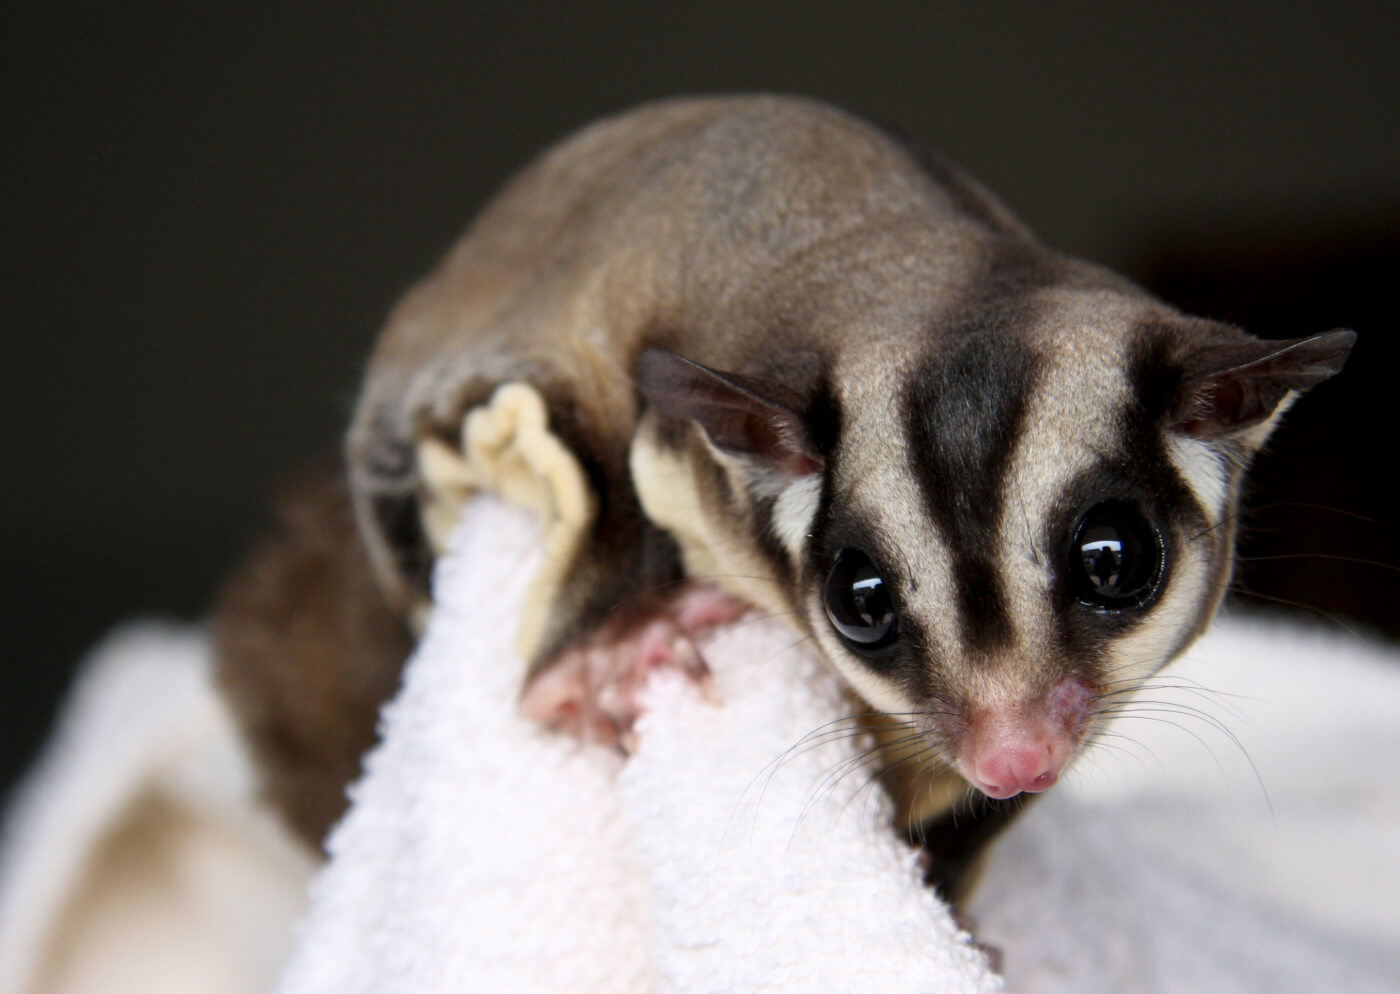 Why Exotic 'Pets' Don't Belong in Your Home | PETA Kids